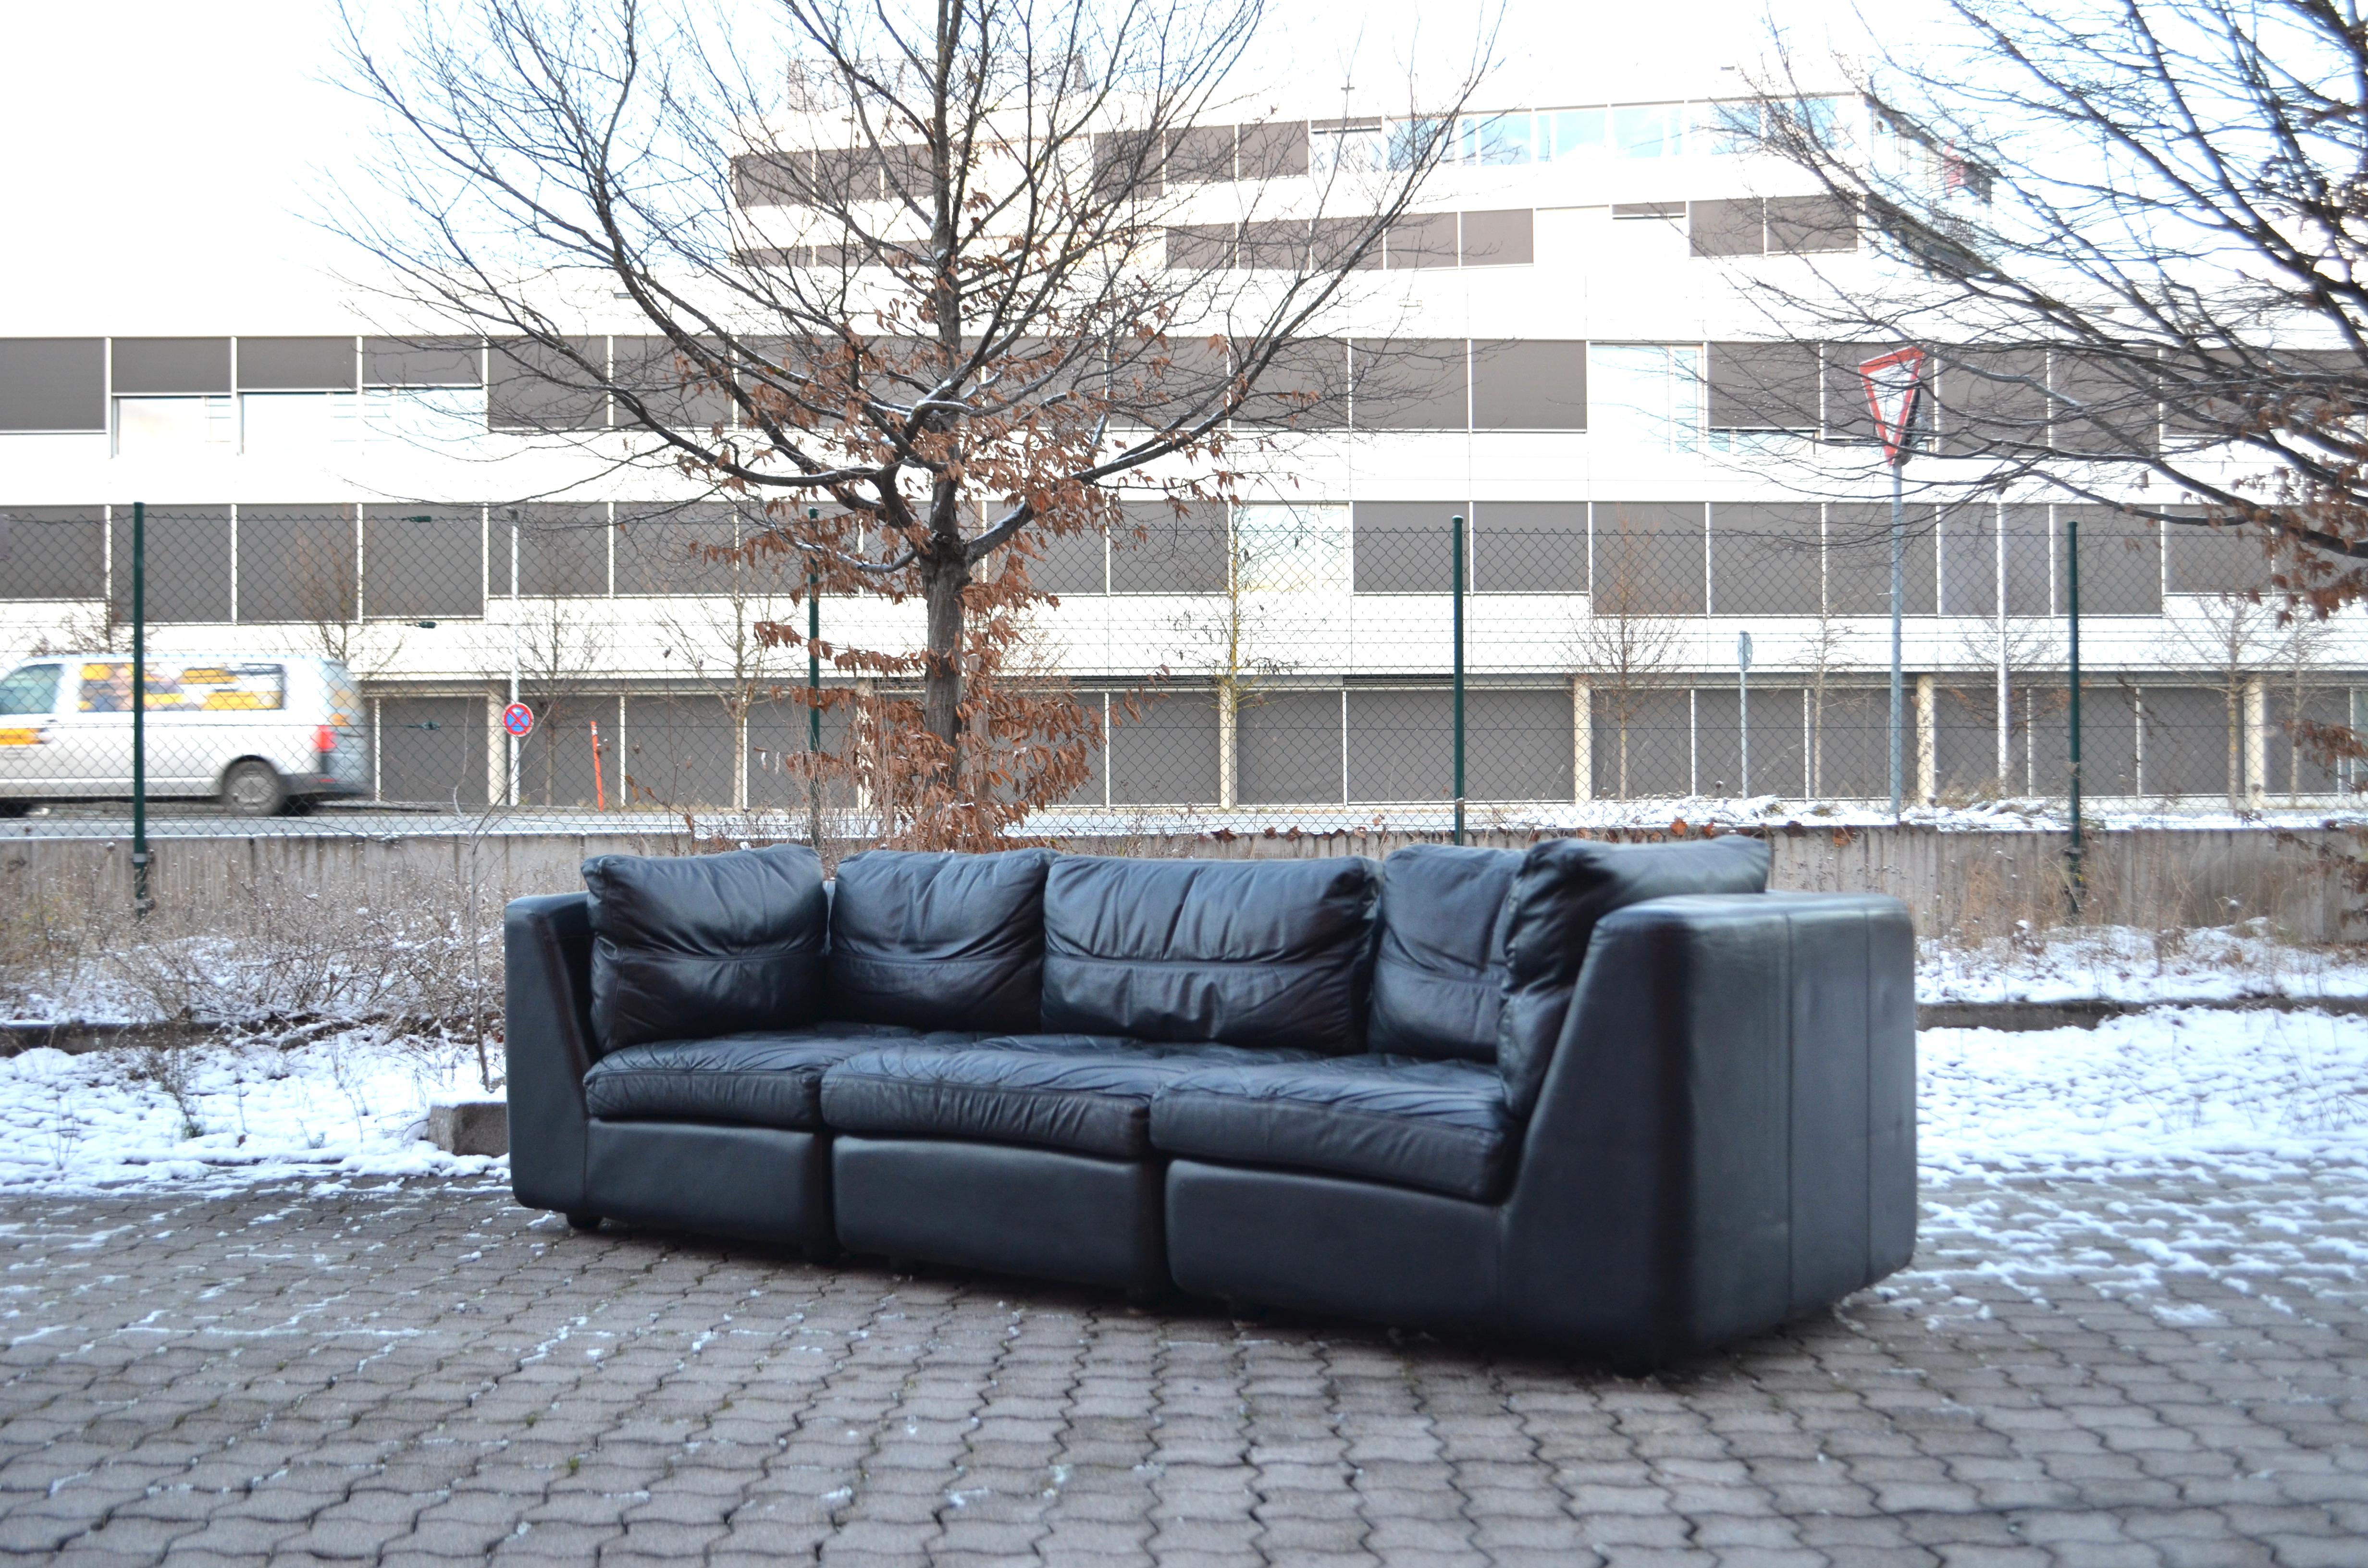 This stunning Modular sectional leather sofa was by Rolf Benz manufactured in Germany.
It is a pure 70ties design with timeless modern shape.
The frame of every element is made of Styrofoam/ Polysterene and foam in the seating area.
This modular